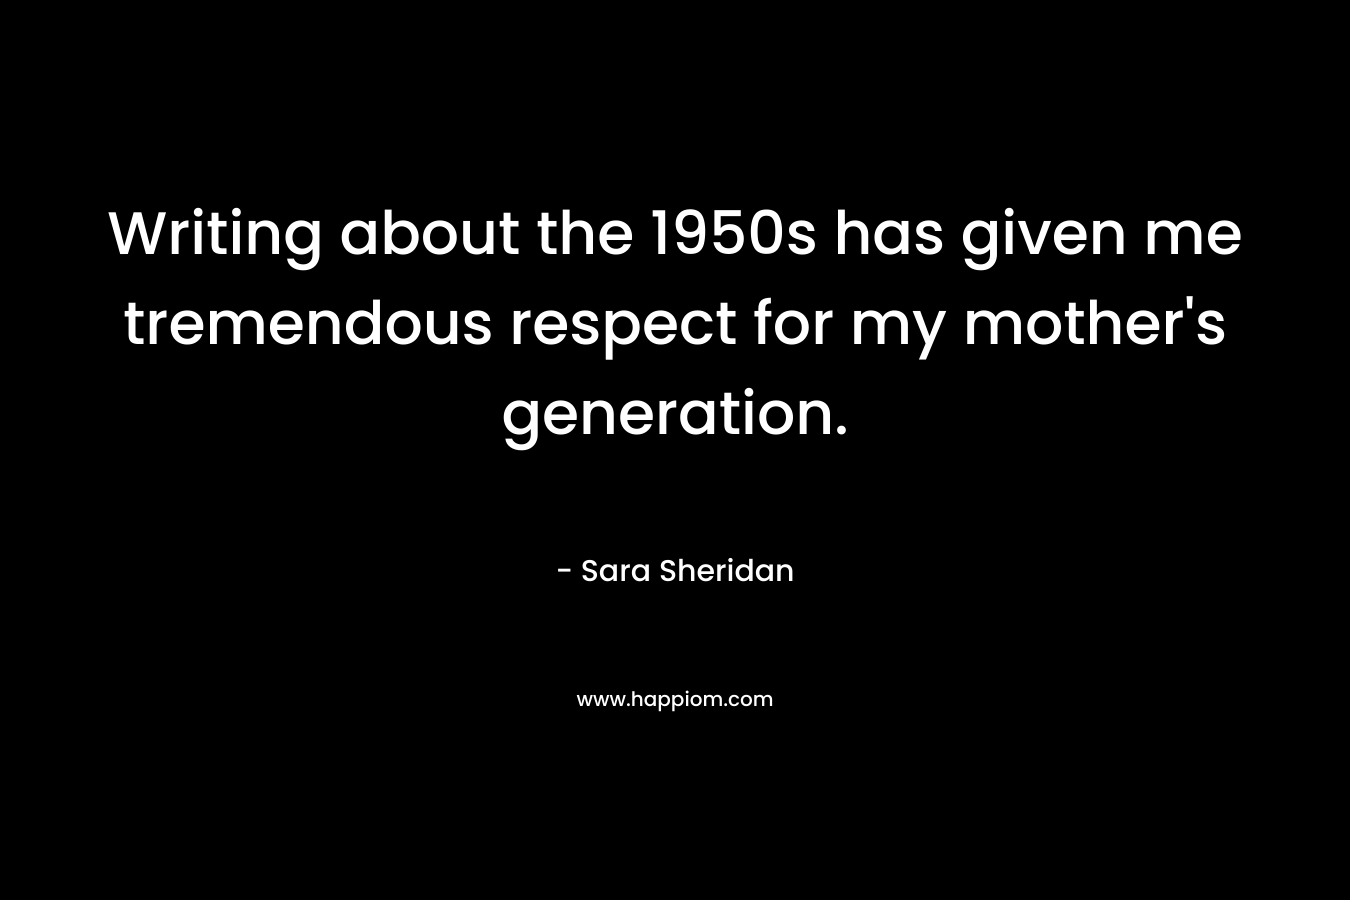 Writing about the 1950s has given me tremendous respect for my mother’s generation. – Sara Sheridan